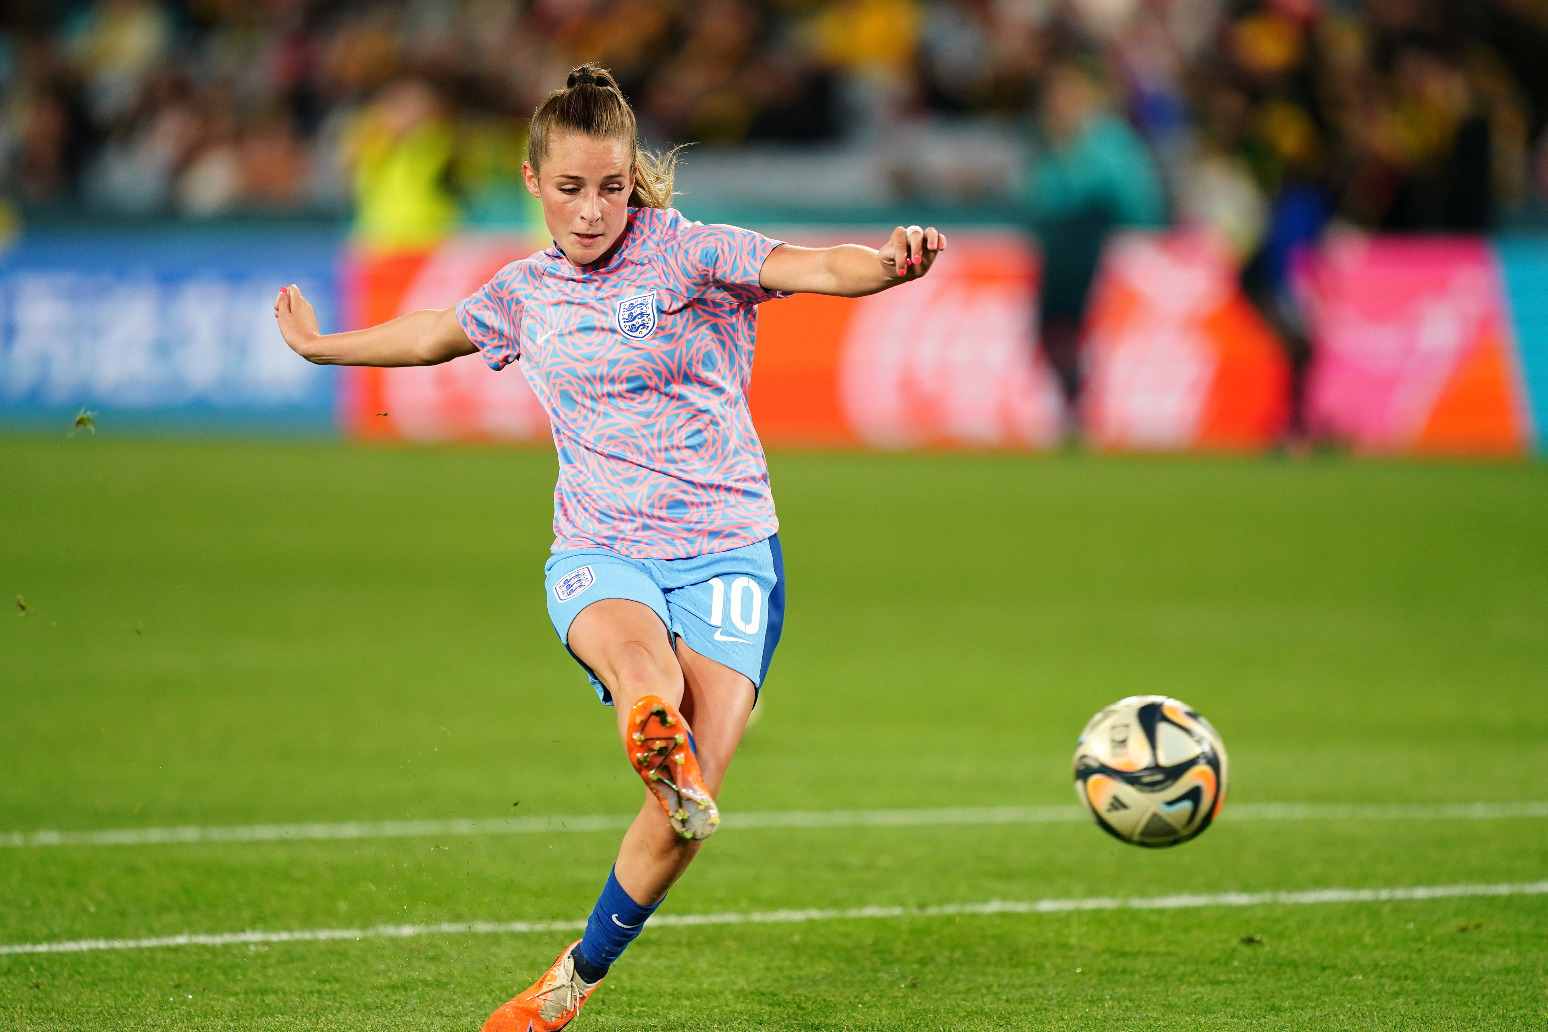 It is not a surprise Ella Toone is in the World Cup final 